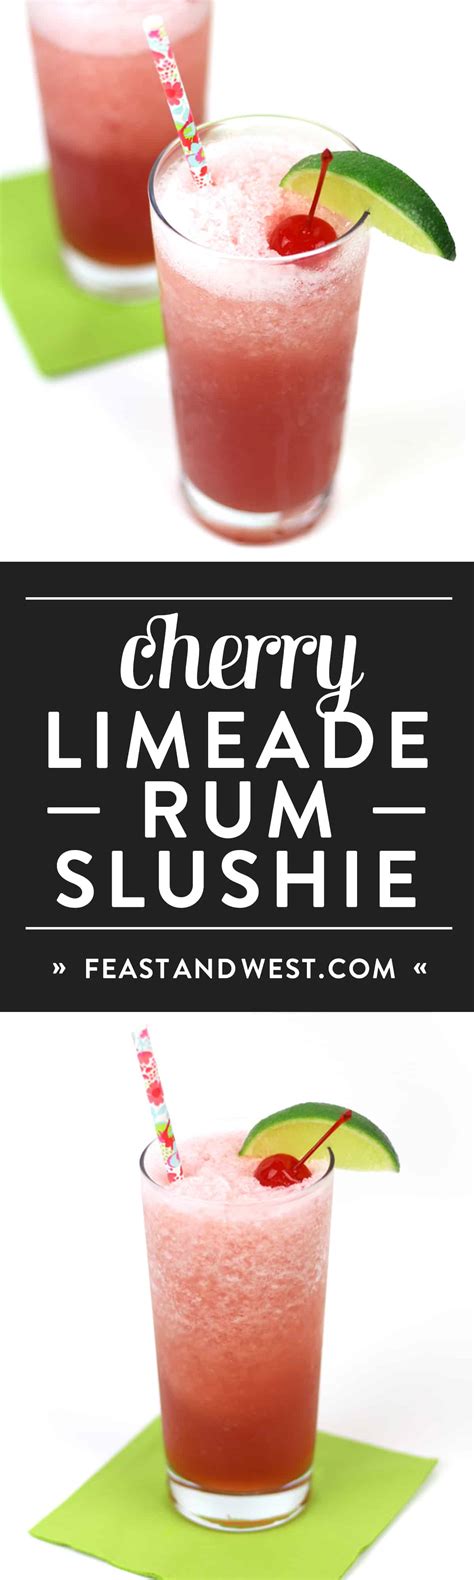 Minute maid limeade can has 90.0 calories. Cherry Limeade Rum Slushies » Feast + West